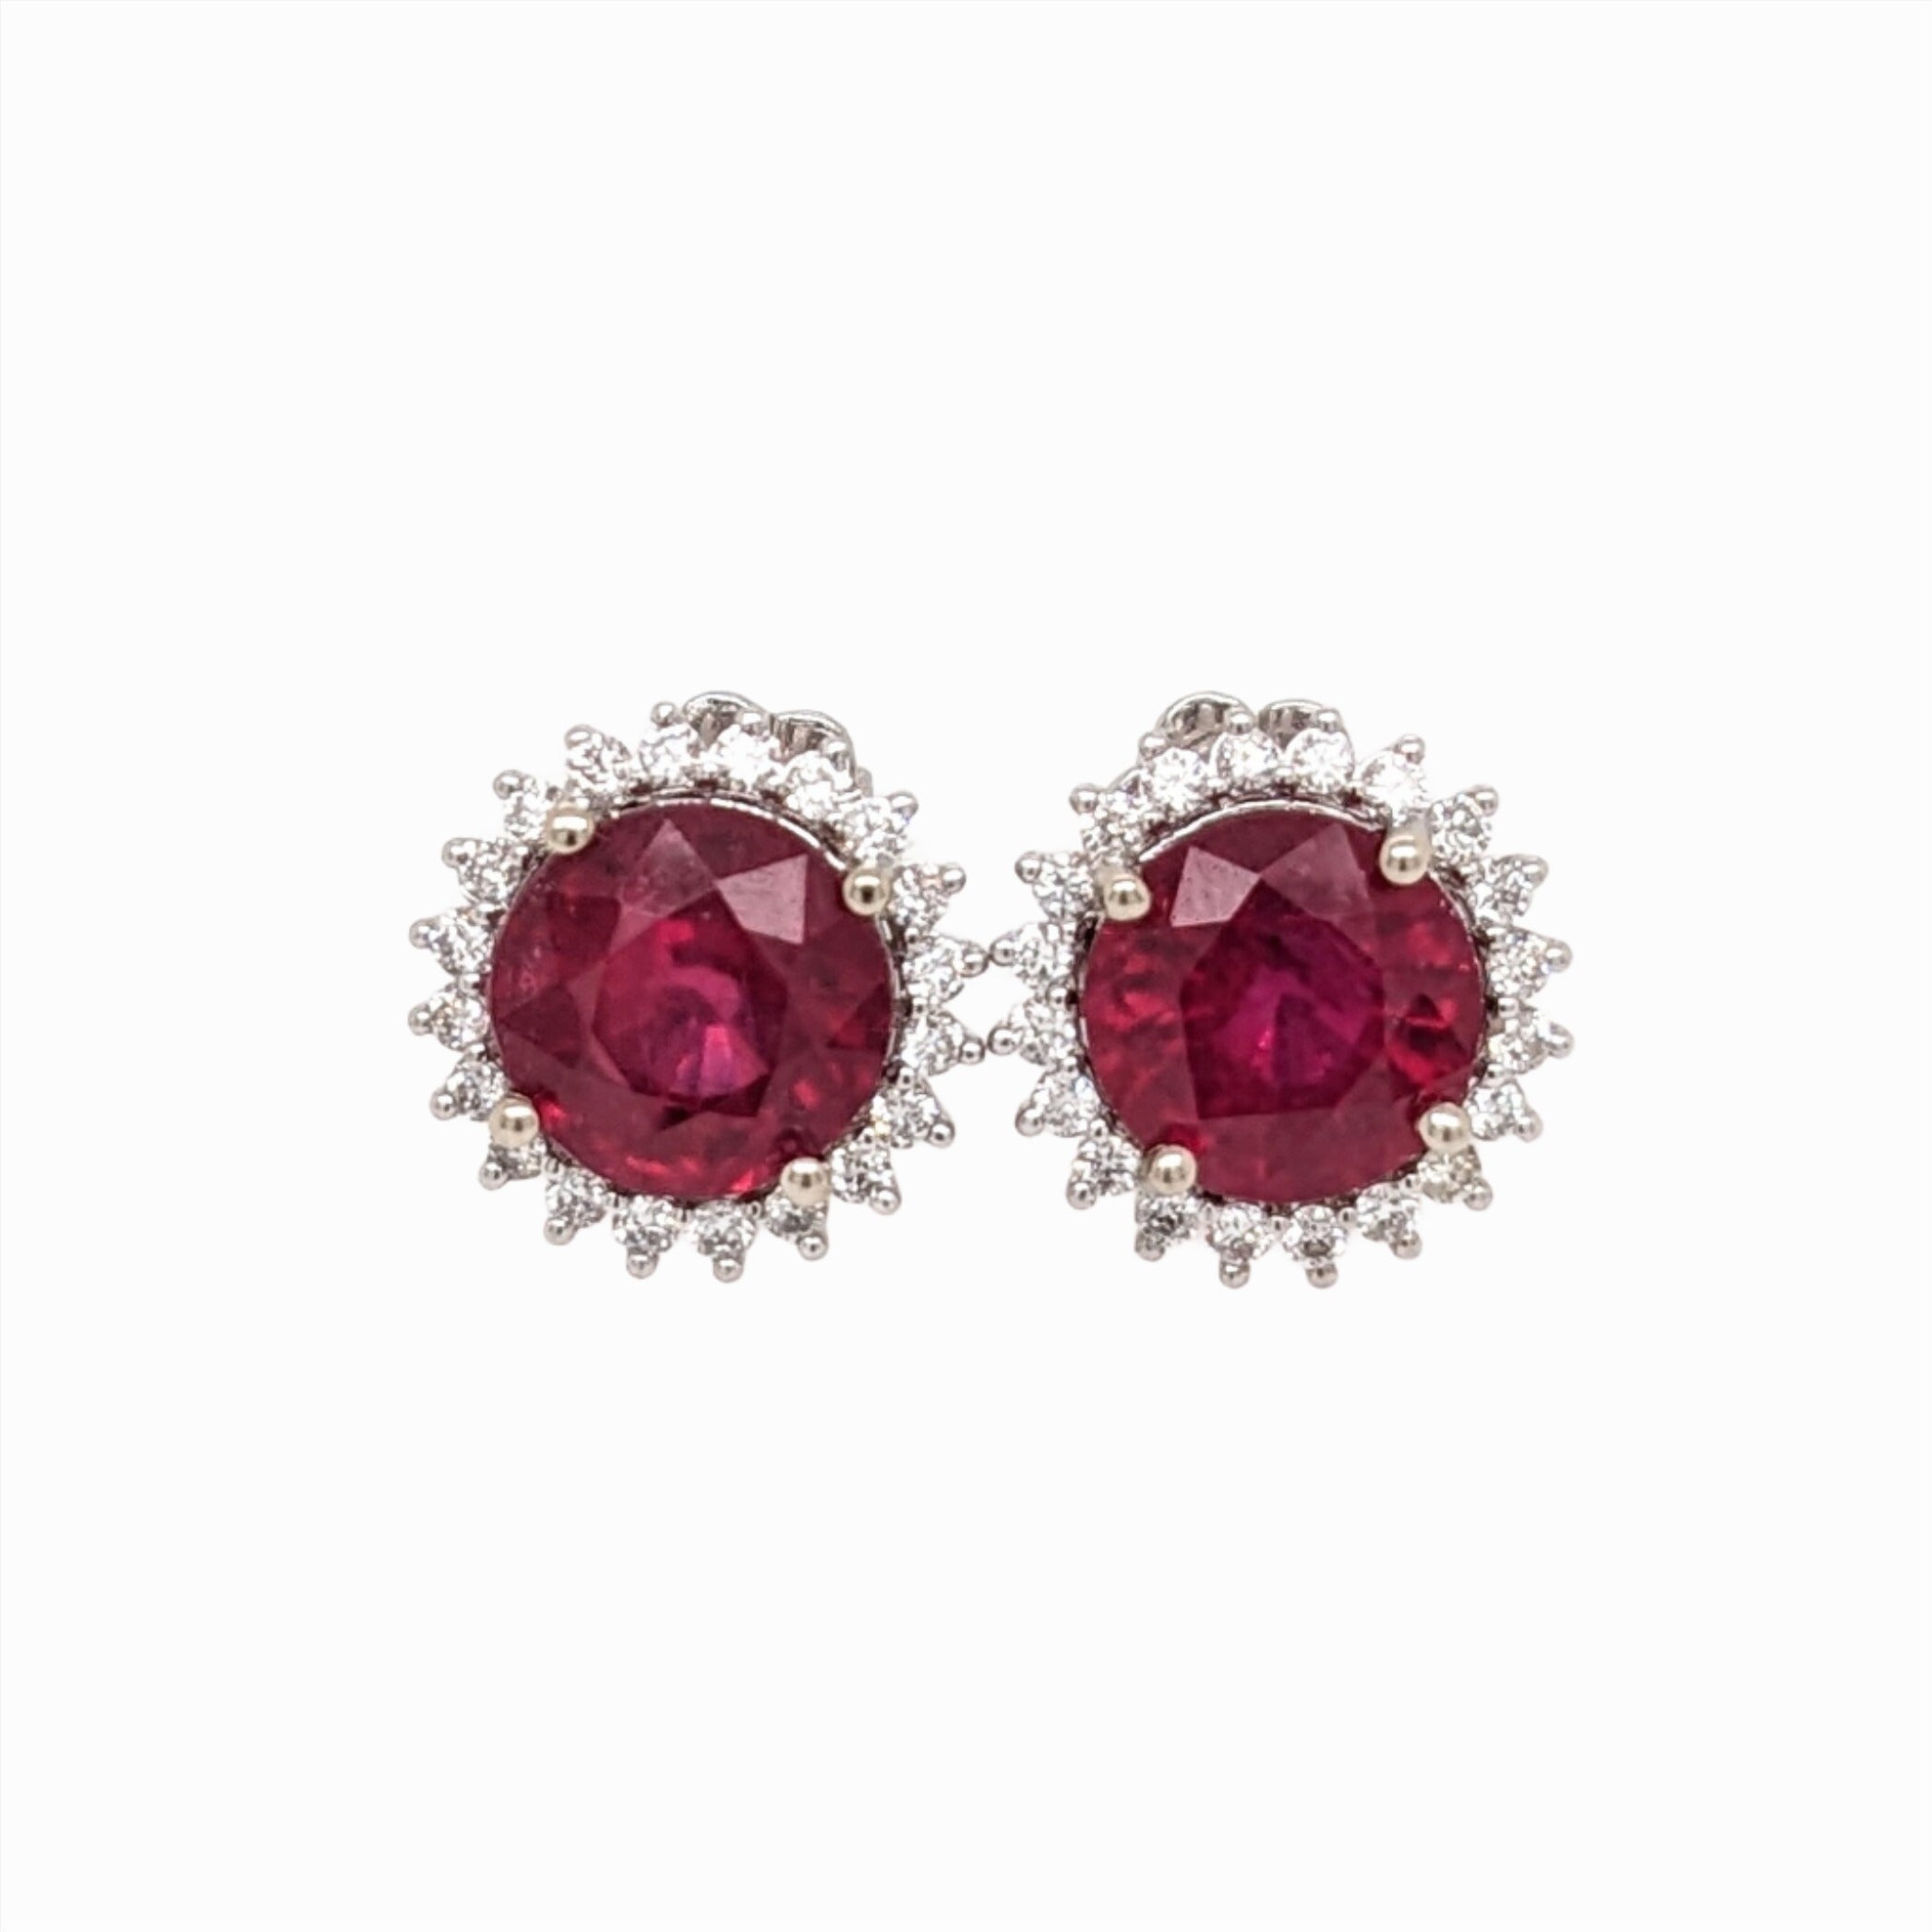 Dangle & Drop Earrings-Beautiful Red Ruby Studs in 14k Solid White Gold with a Natural Diamond Halo | Round | July Birthstone | Dainty Studs - NNJGemstones